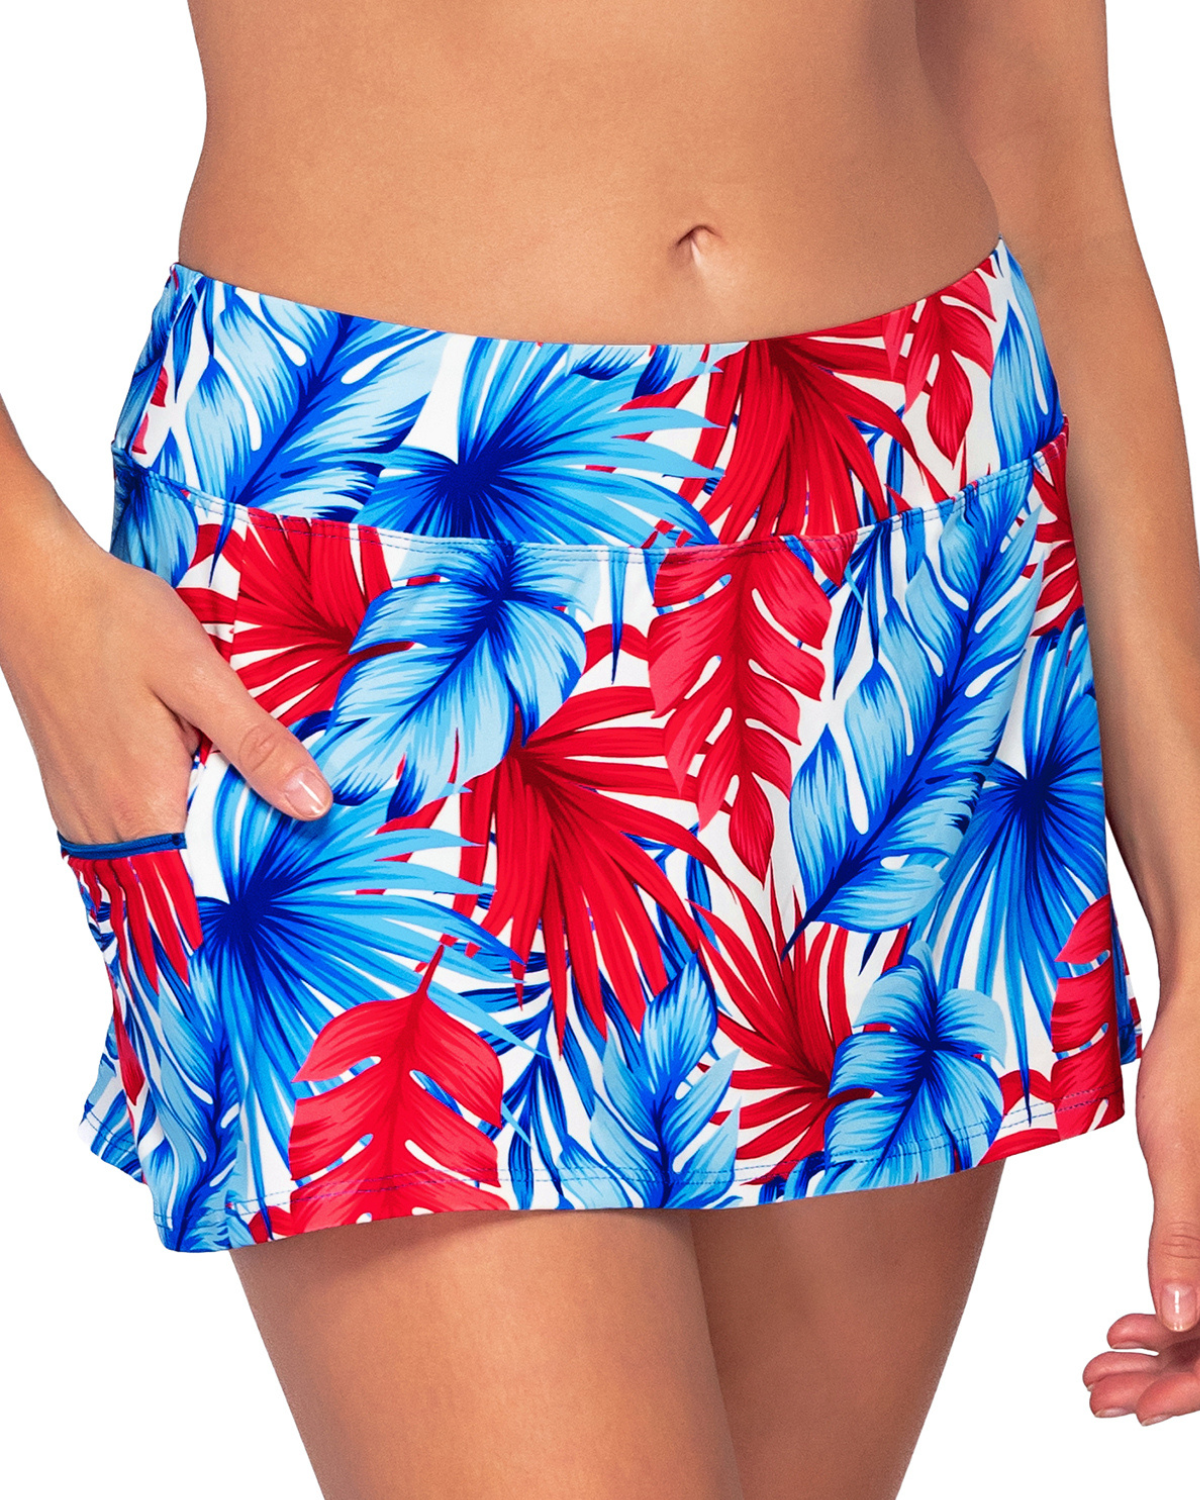 Model wearing a swim skirt with a side pocket and hidden shorts in a red, white and blue palm front print.